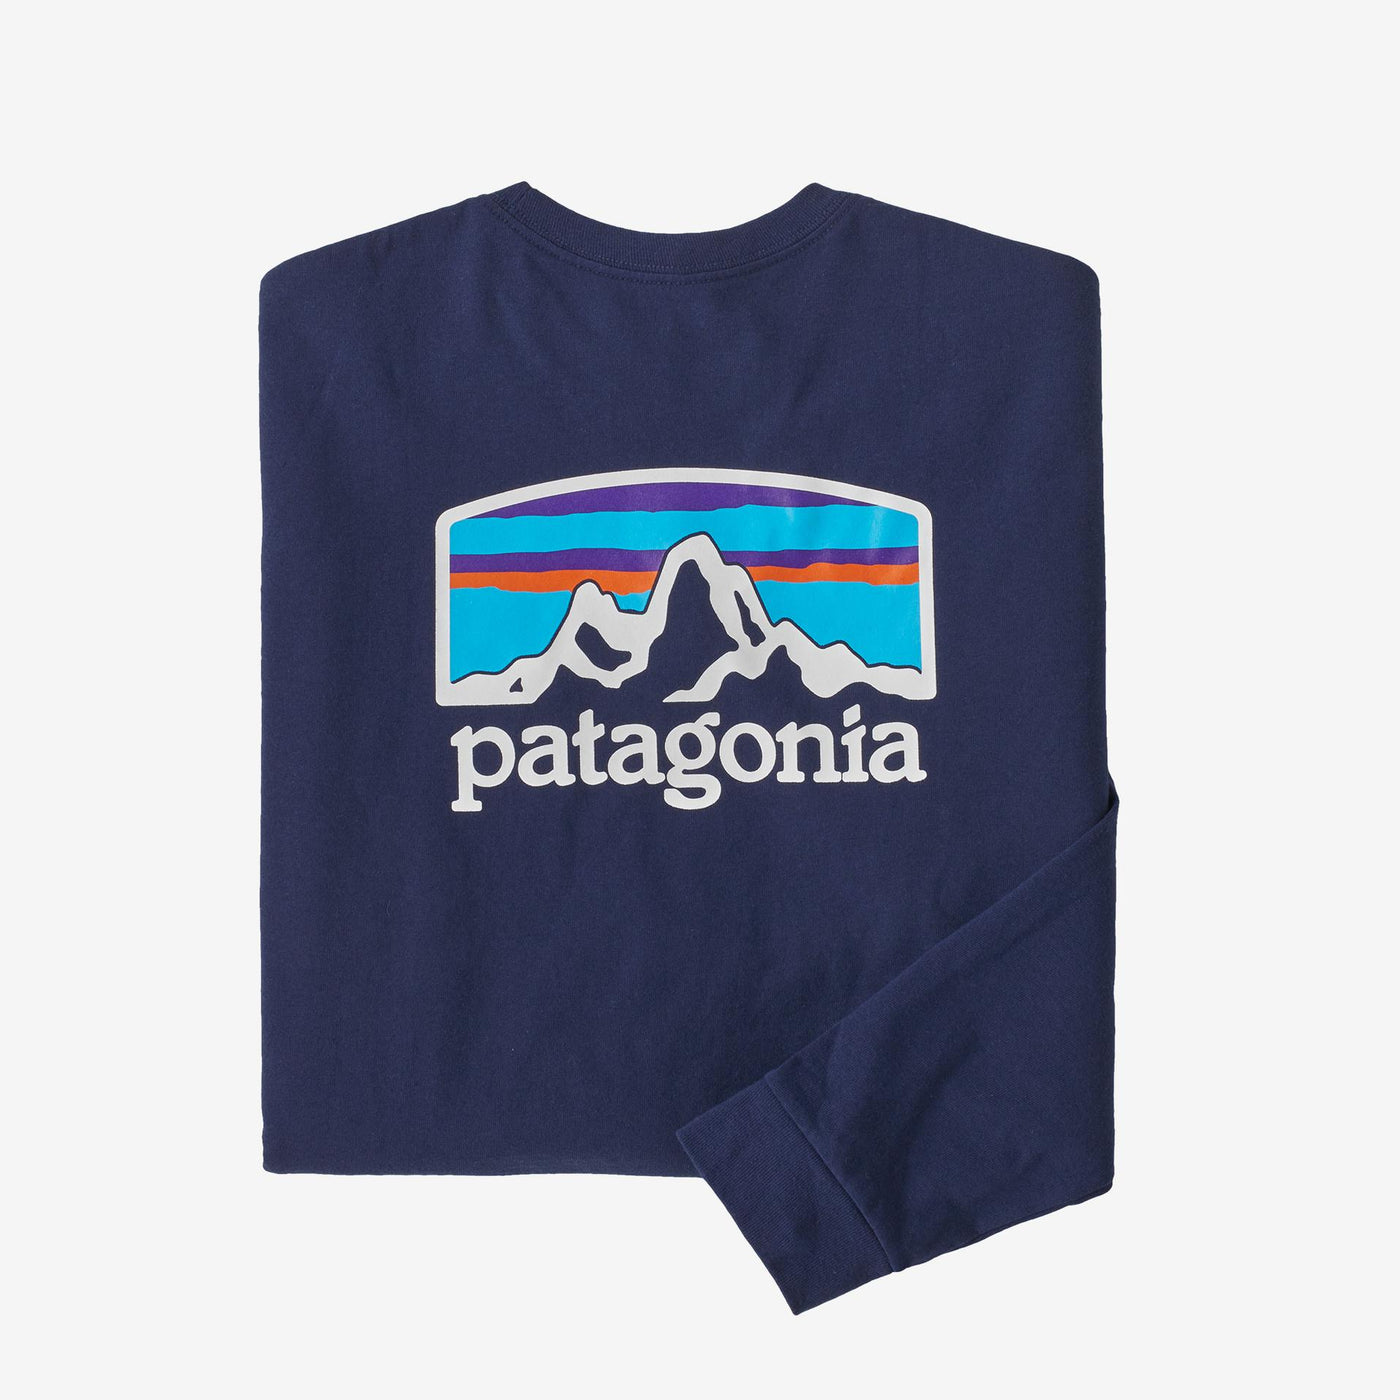 Patagonia Men's Long Sleeve Fitz Roy Horizons Responsibili-Tee-Men's Clothing-Sound Blue-S-Kevin's Fine Outdoor Gear & Apparel